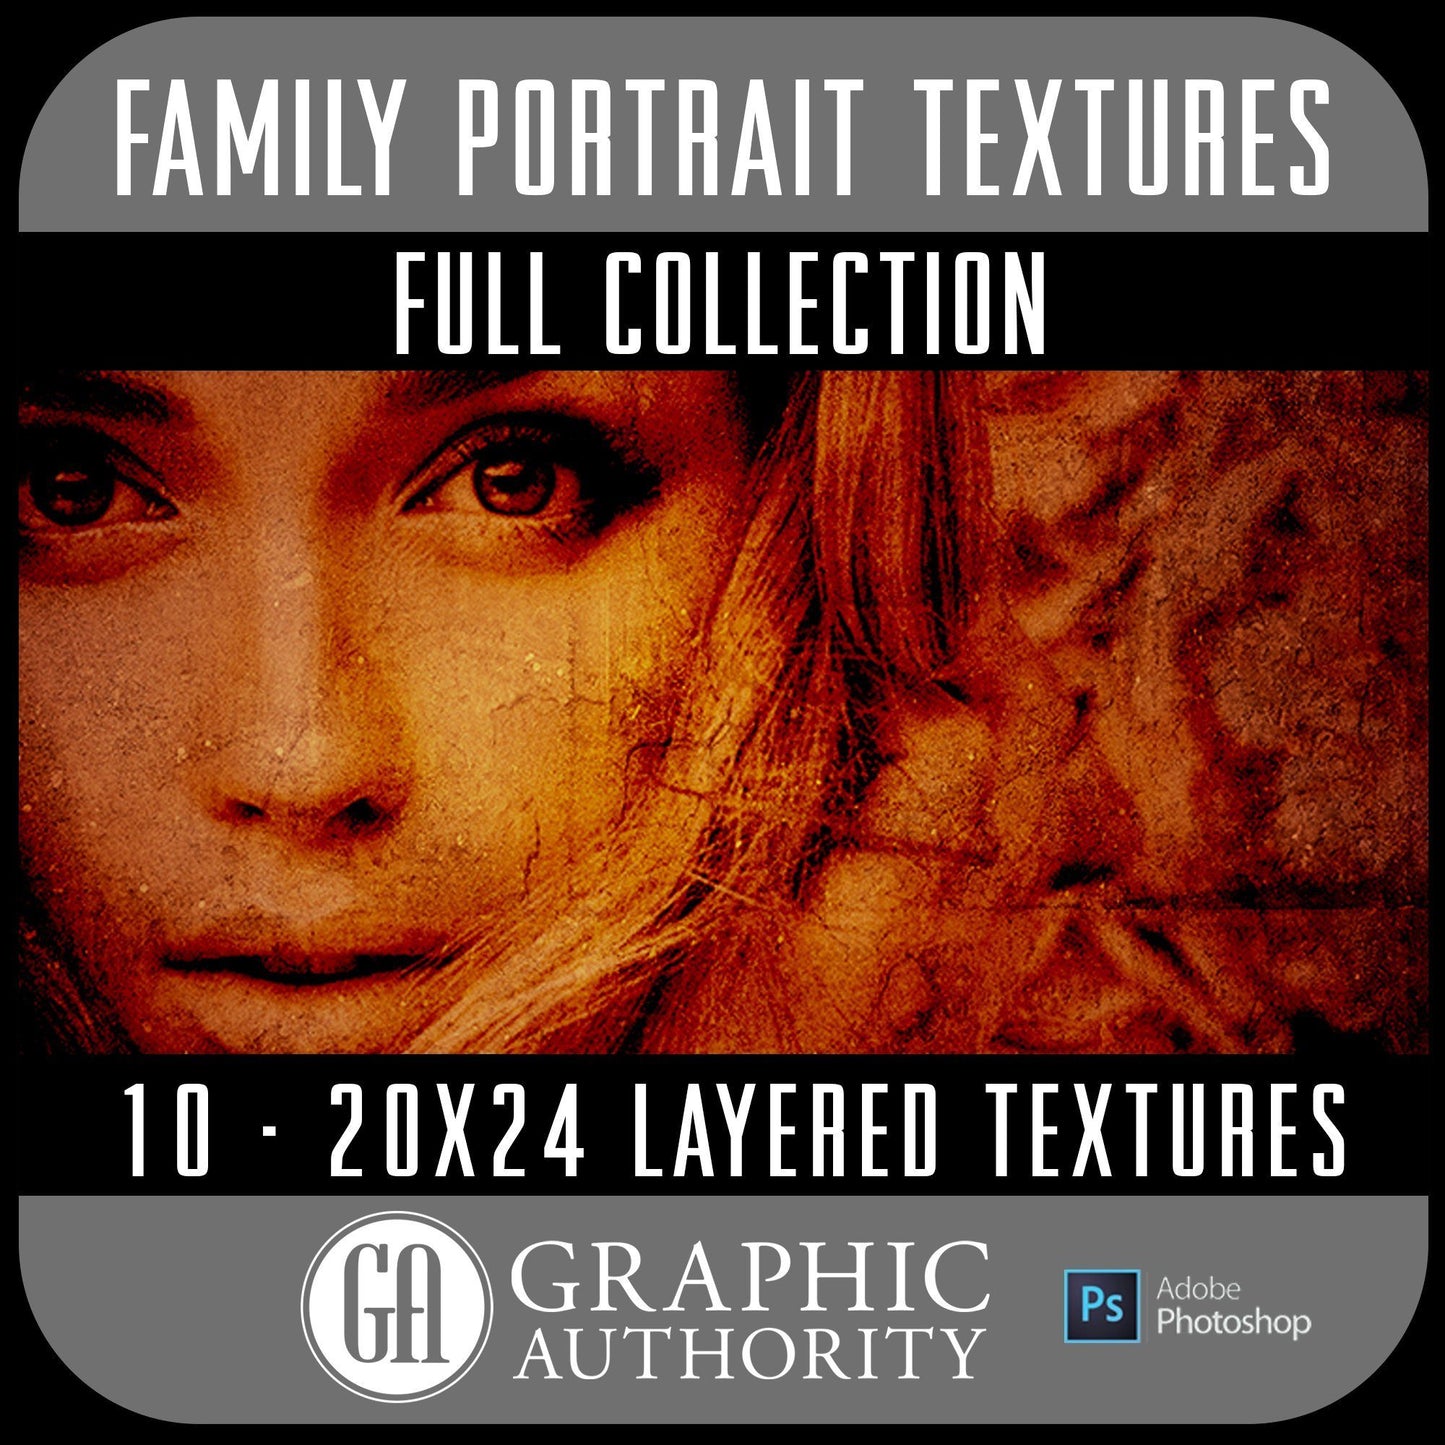 Family Portrait - 20x24 Layered Textures - Full Collection-Photoshop Template - Graphic Authority